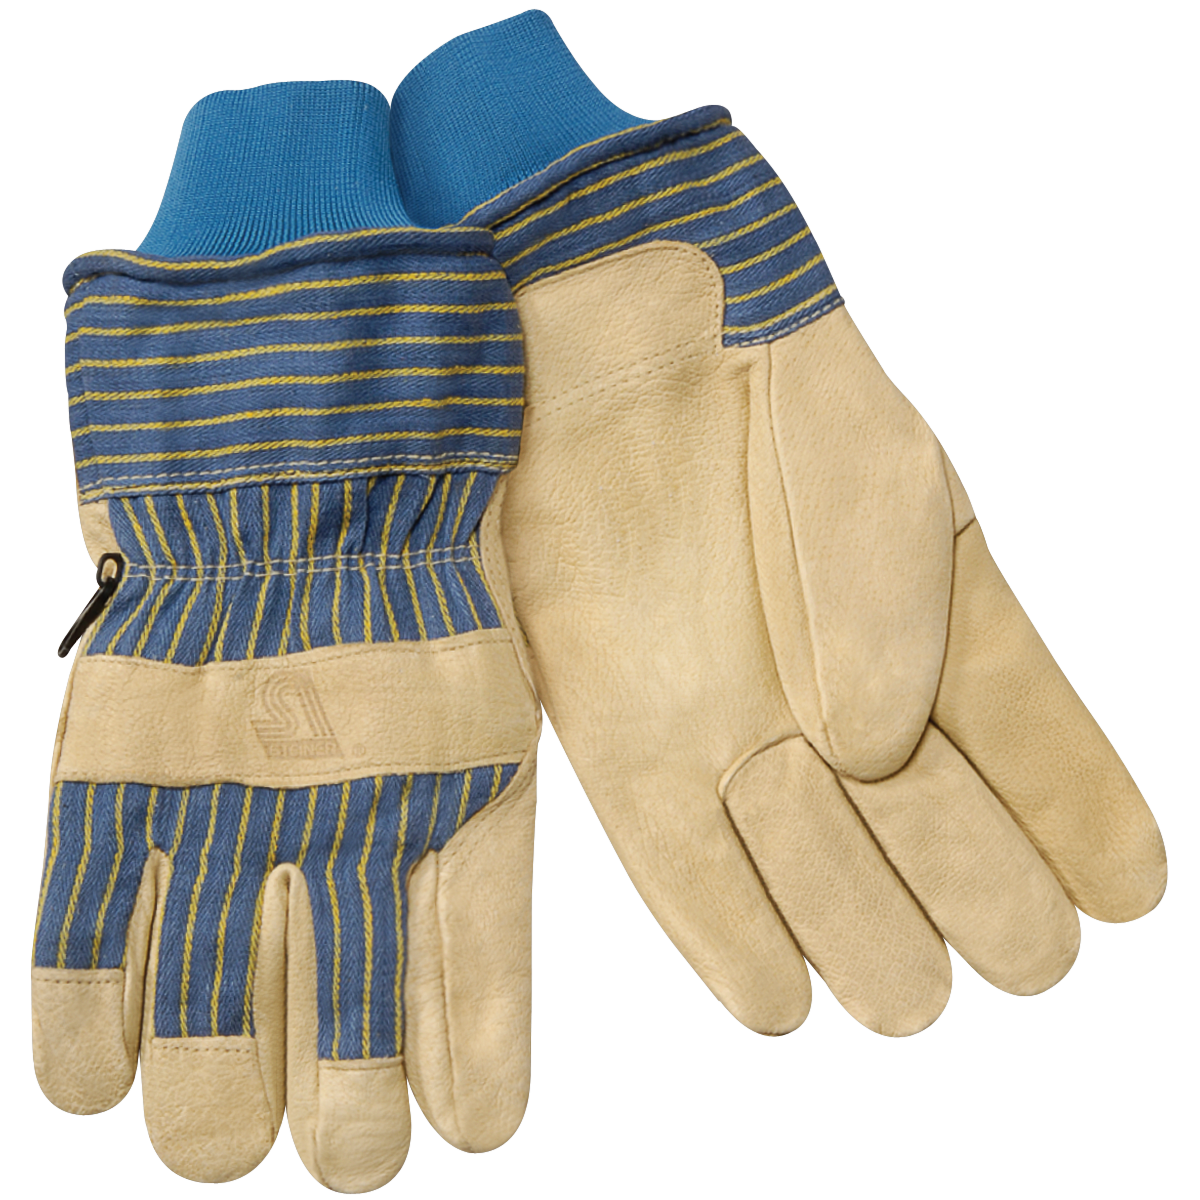 Winter Gloves Download Free PNG